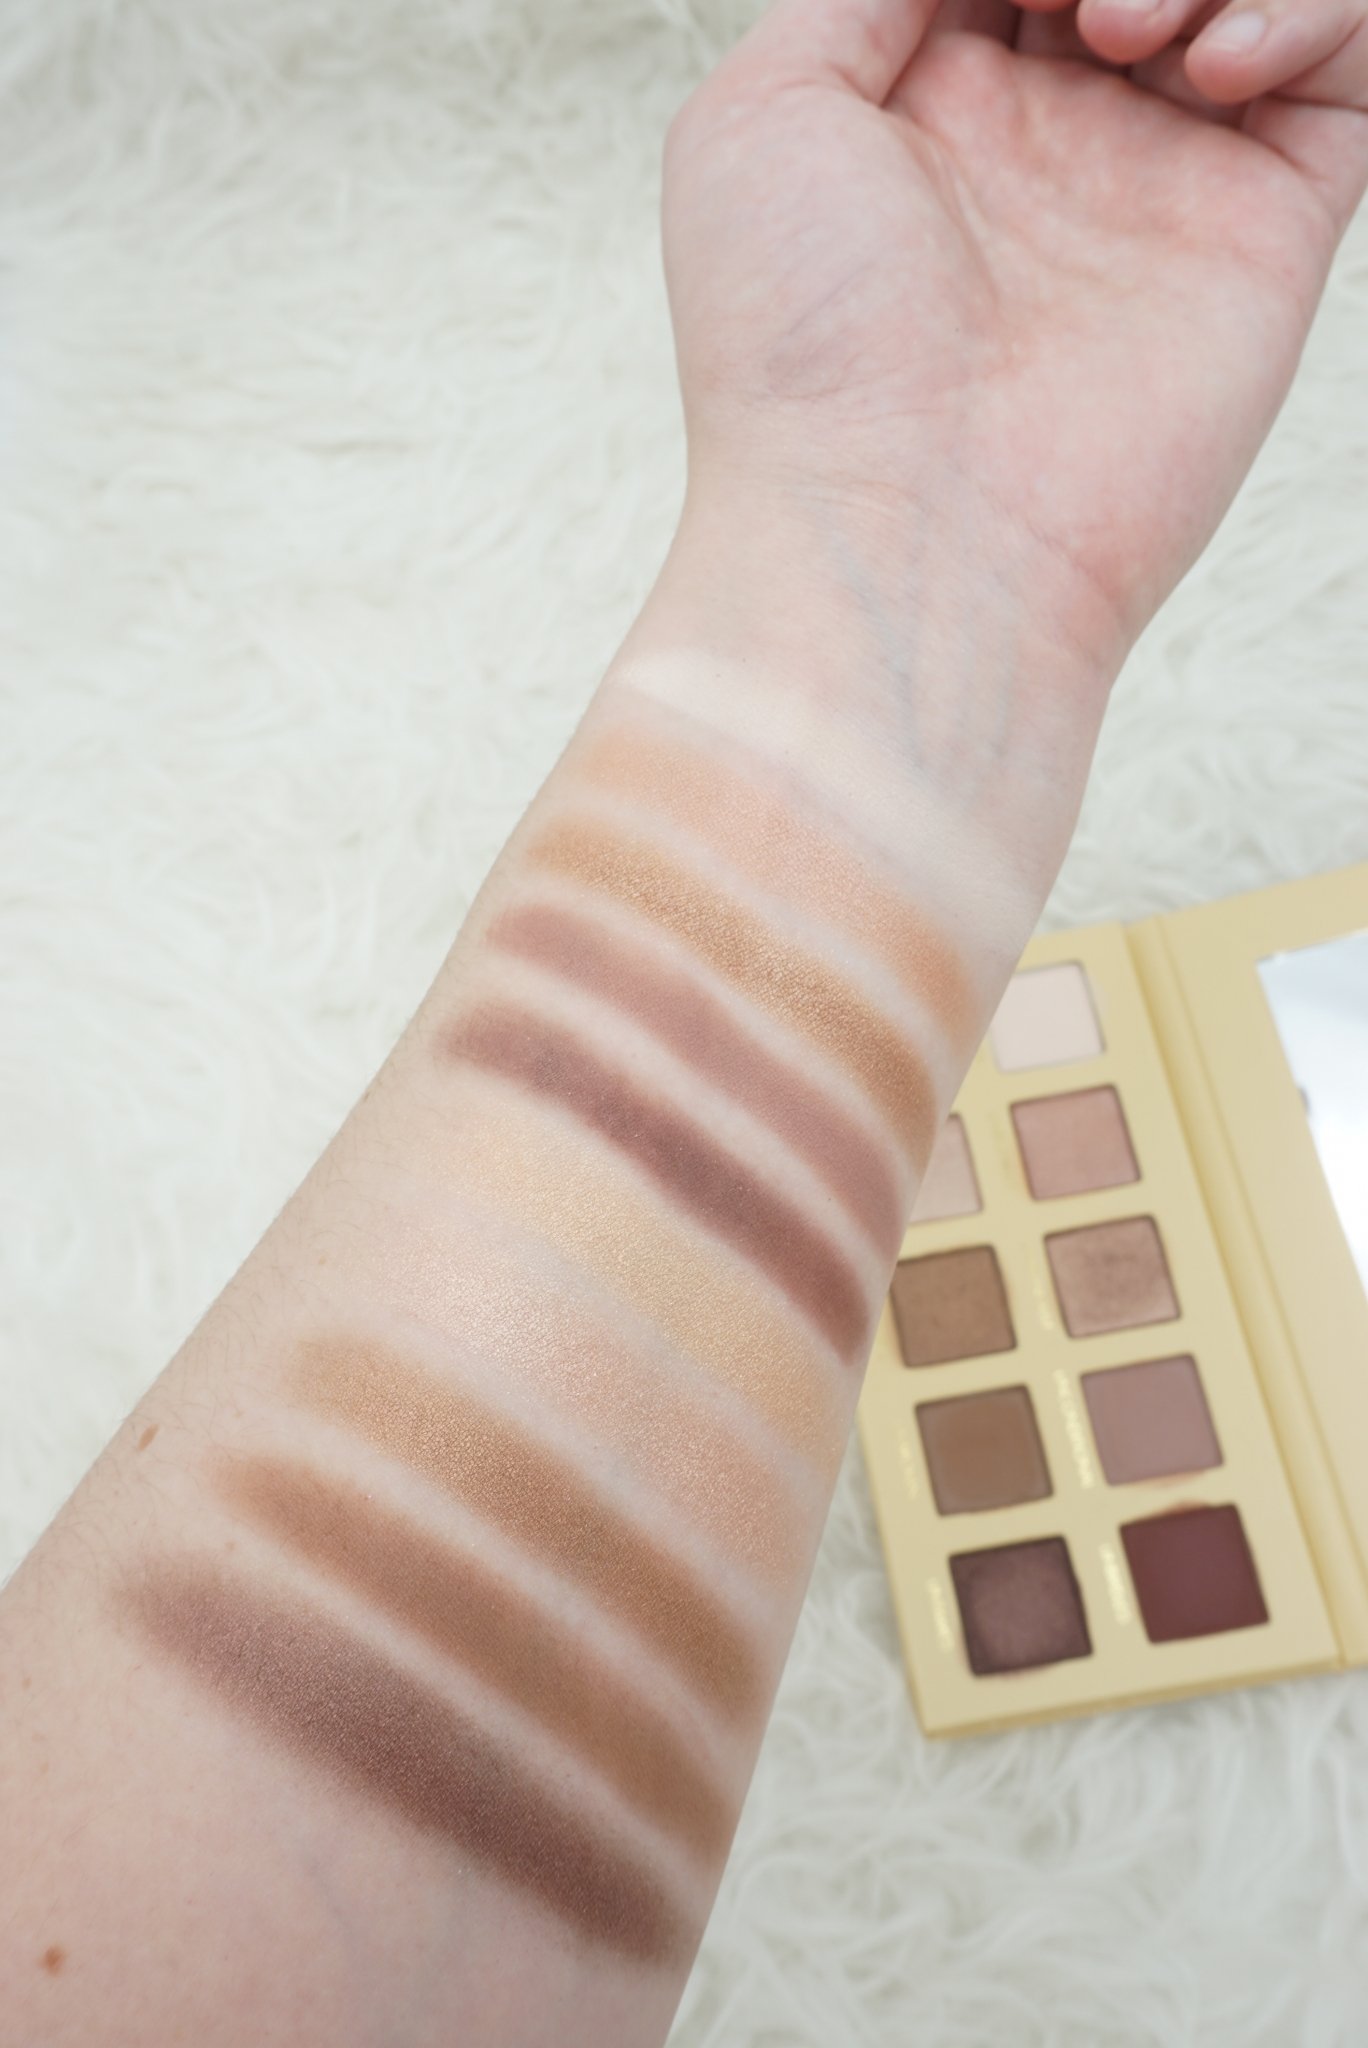 LORAC Cosmetics Unzipped and Unzipped Gold Palettes + more | Haul, Review, and Swatches